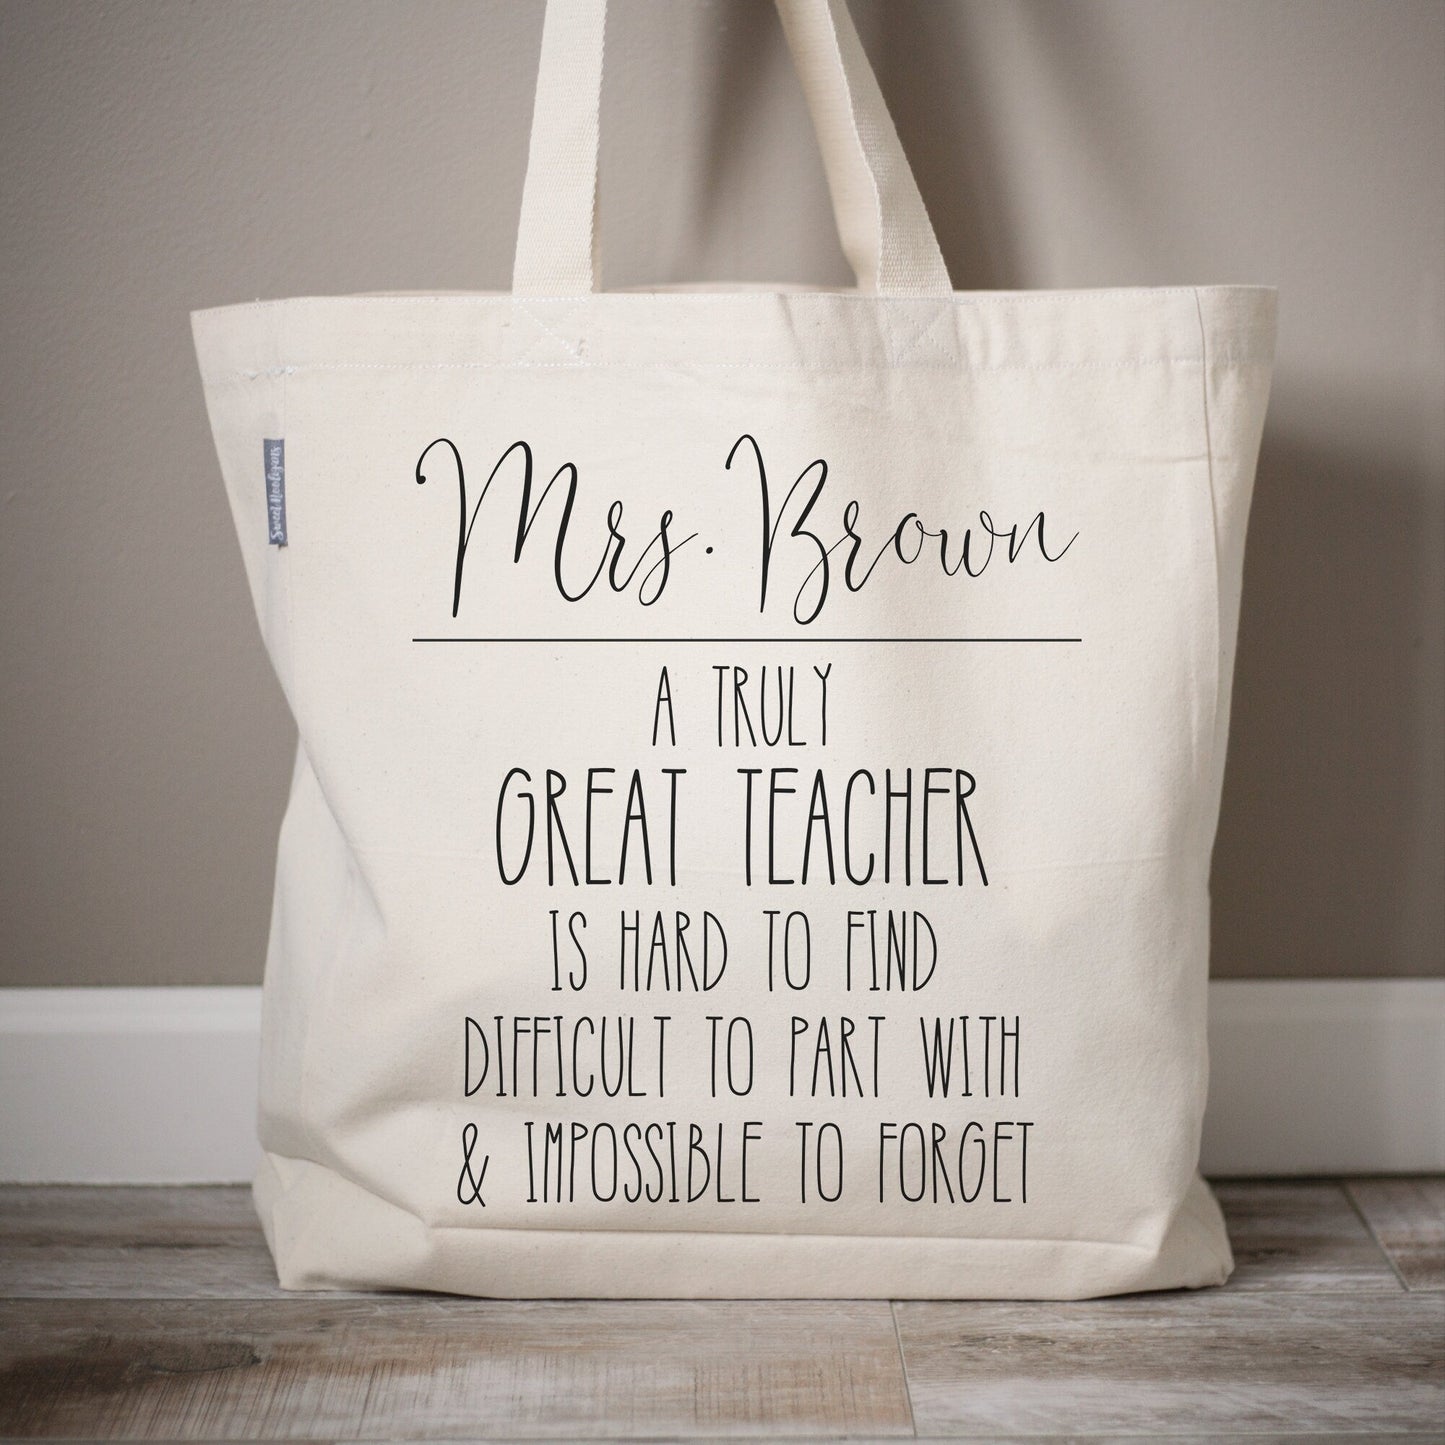 Load image into Gallery viewer, Truly Great Teacher Tote Gift Bag Teacher Gift | Personalized Teacher Name Great Teacher Tote Bag Gift | Monogrammed Tote Canvas | Teacher - Sweet Hooligans Design
